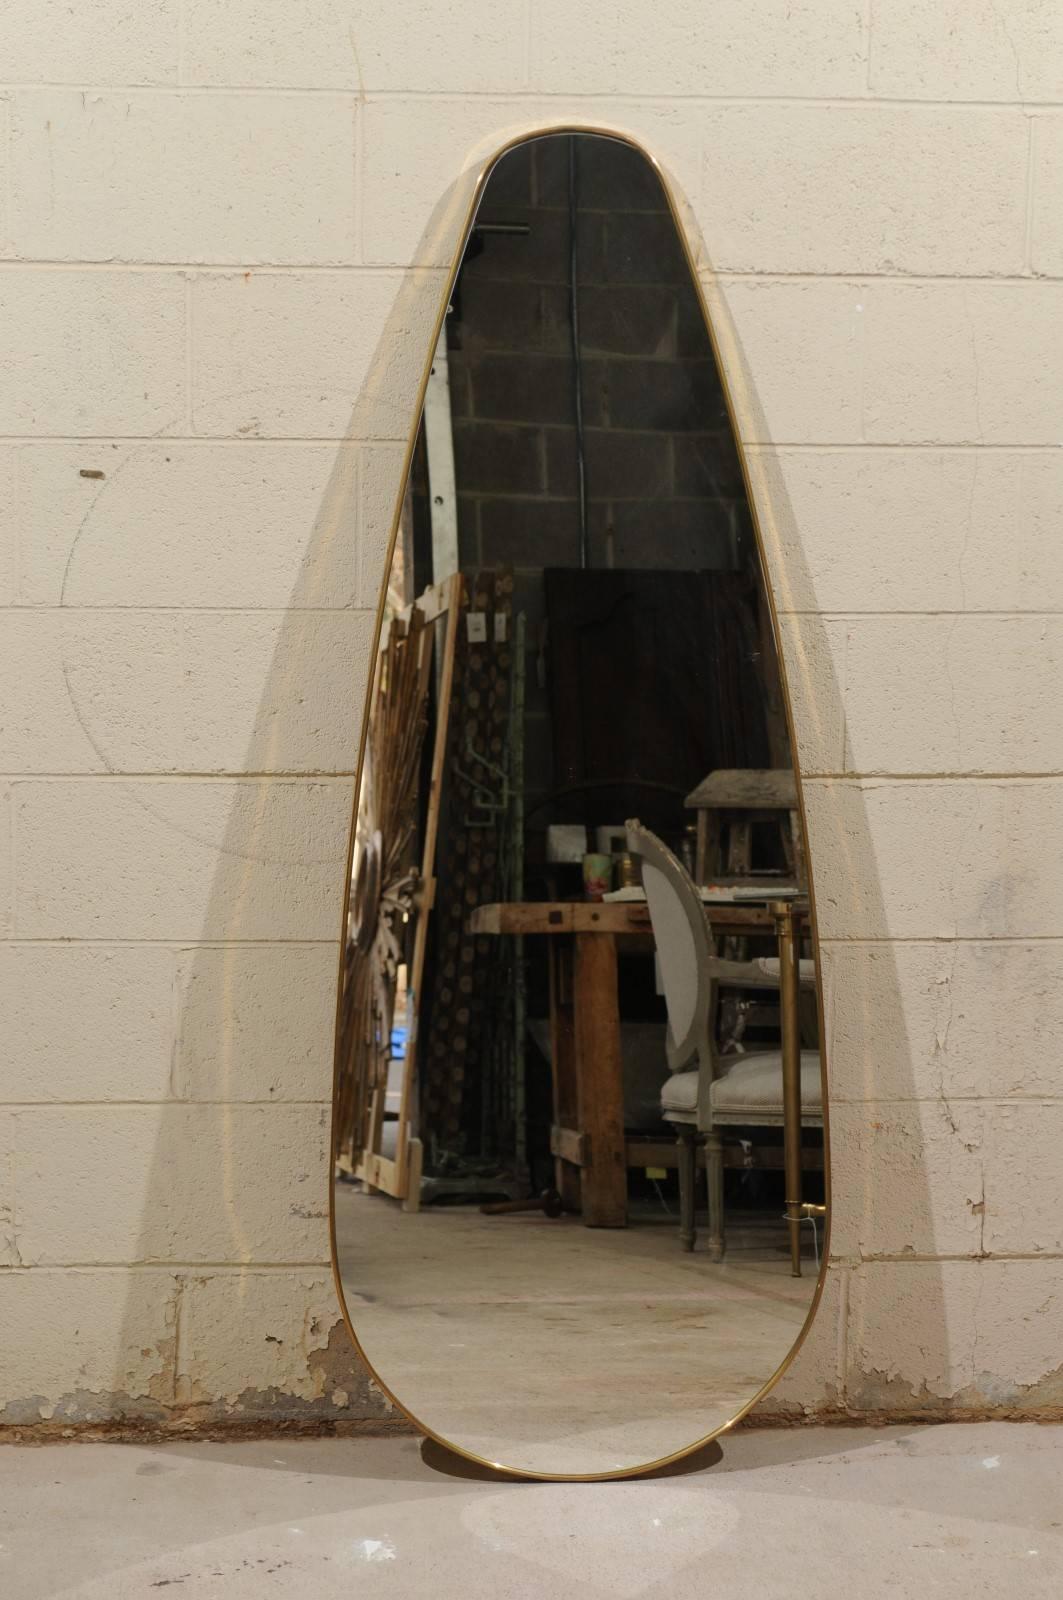 An Italian vintage 1970s oval tall mirror with brass teardrop frame. We're always on the lookout for unusual finds, and this large oval mirror, born in Italy in the 1970s, is a one-of-a-kind wow. We love the retro feel of the brass frame, the size